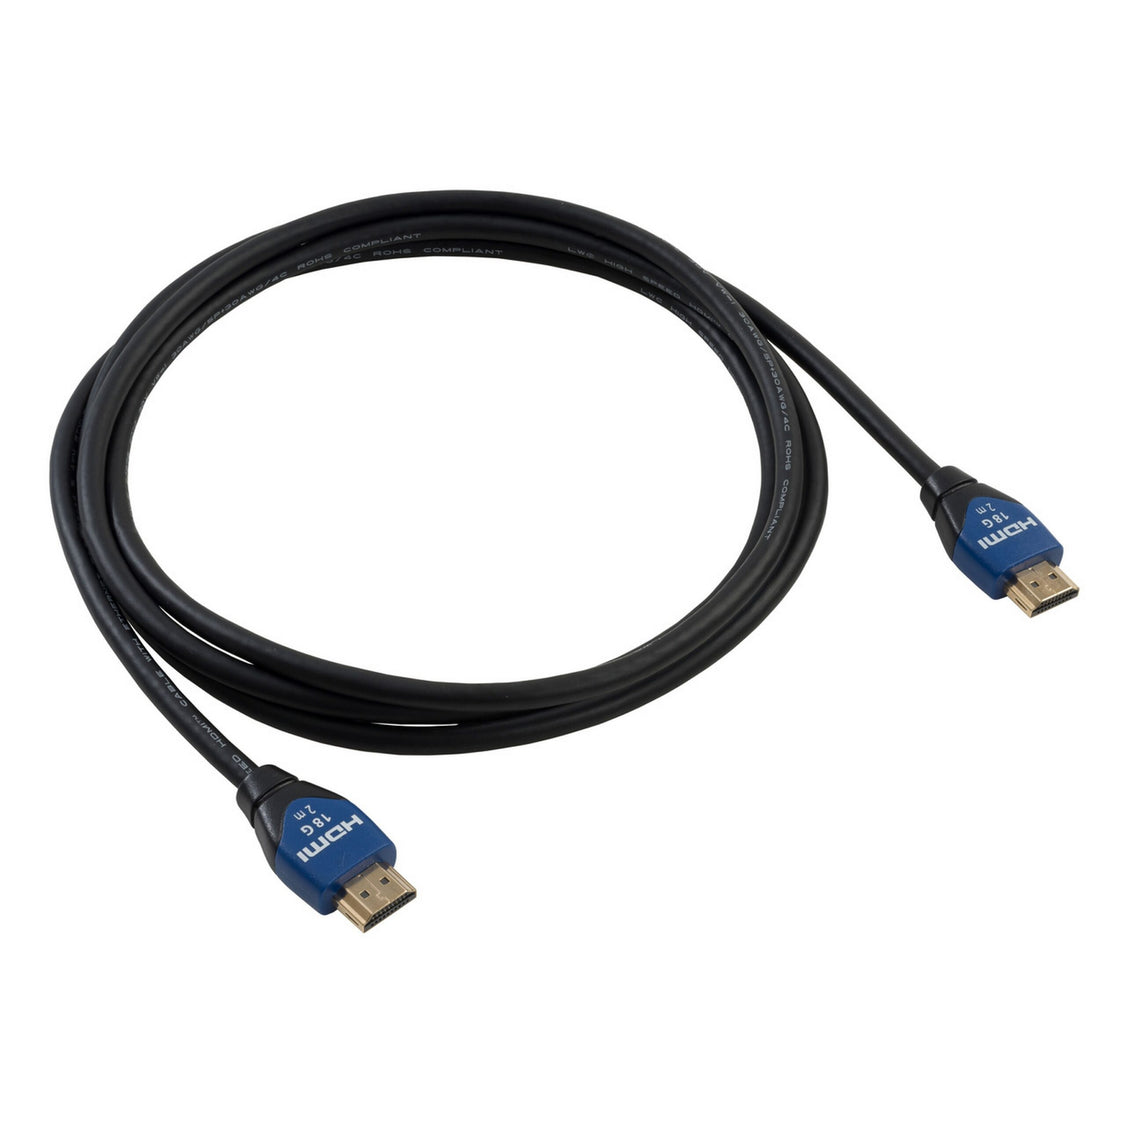 Liberty AV HALO-HC10M 10-Meter HALO Series High Speed HDMI Cable with Ethernet